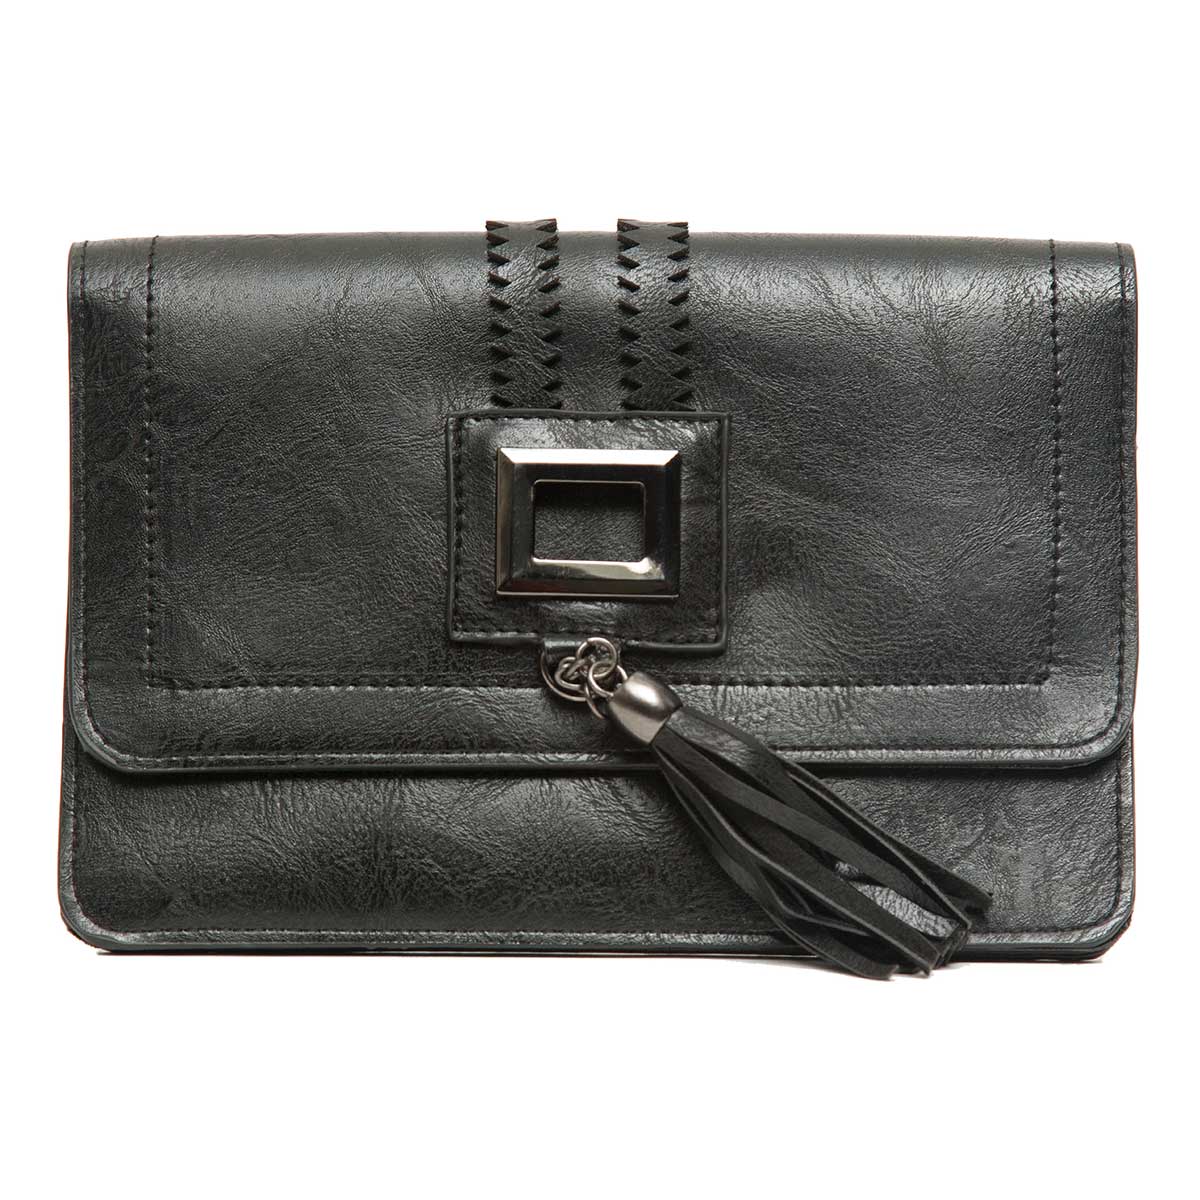 Cross-body Purse with Square Metal Cutout and Tassel